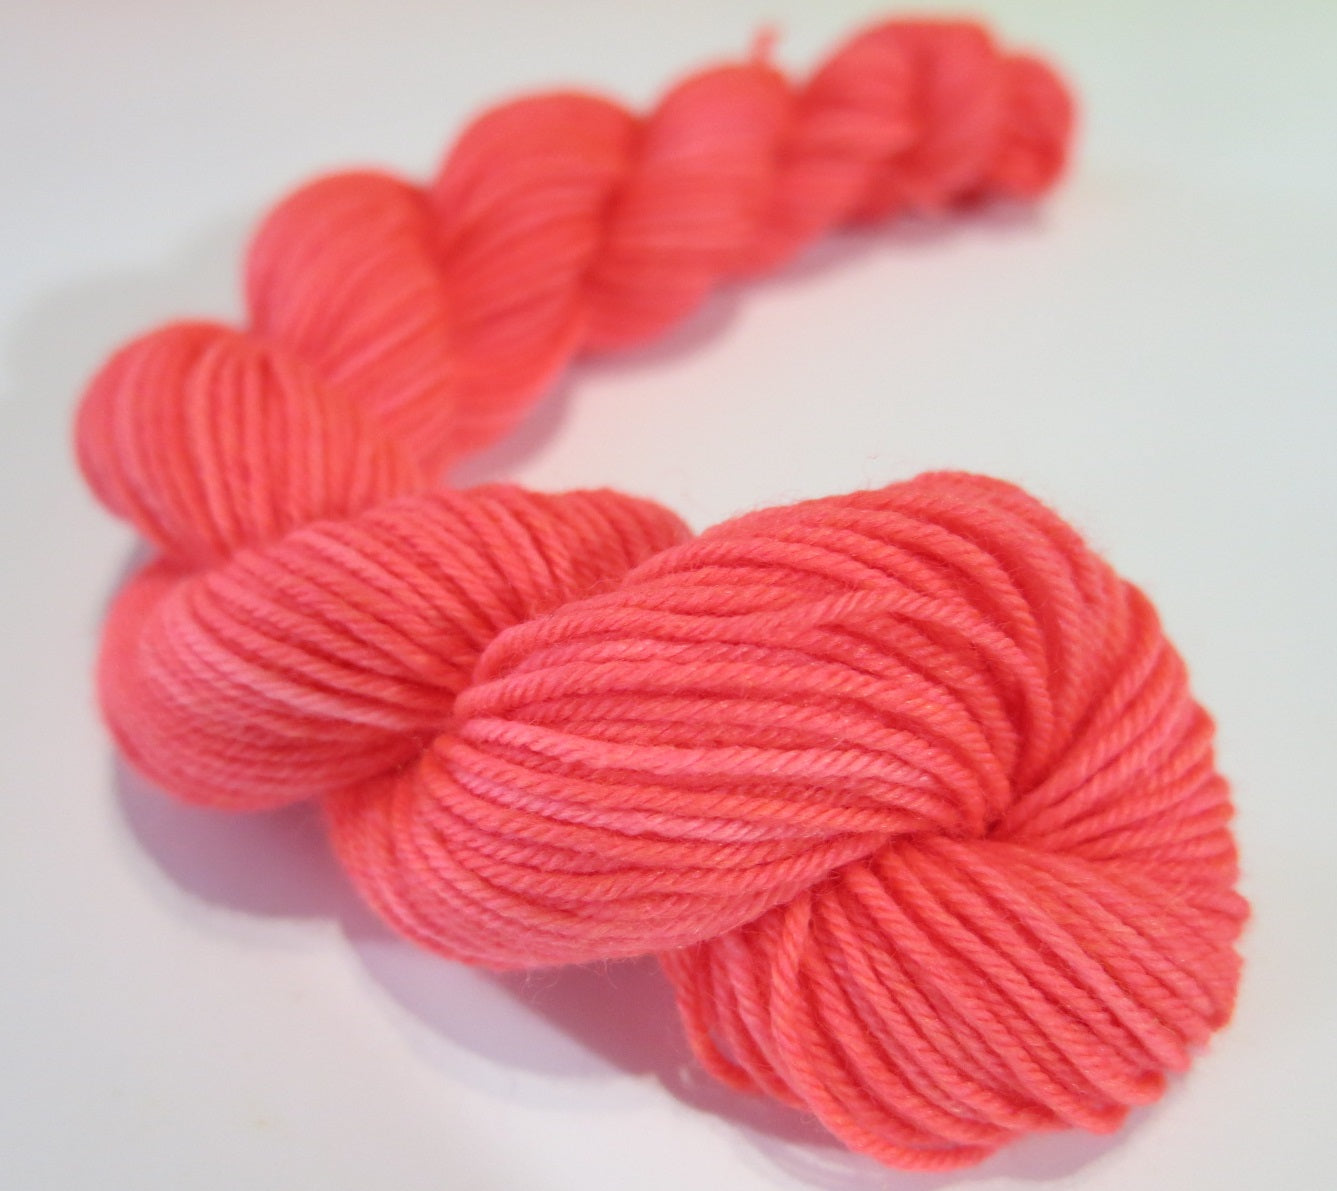 neon coral uv reactive 20g mini yarn skein for knitting and crochet